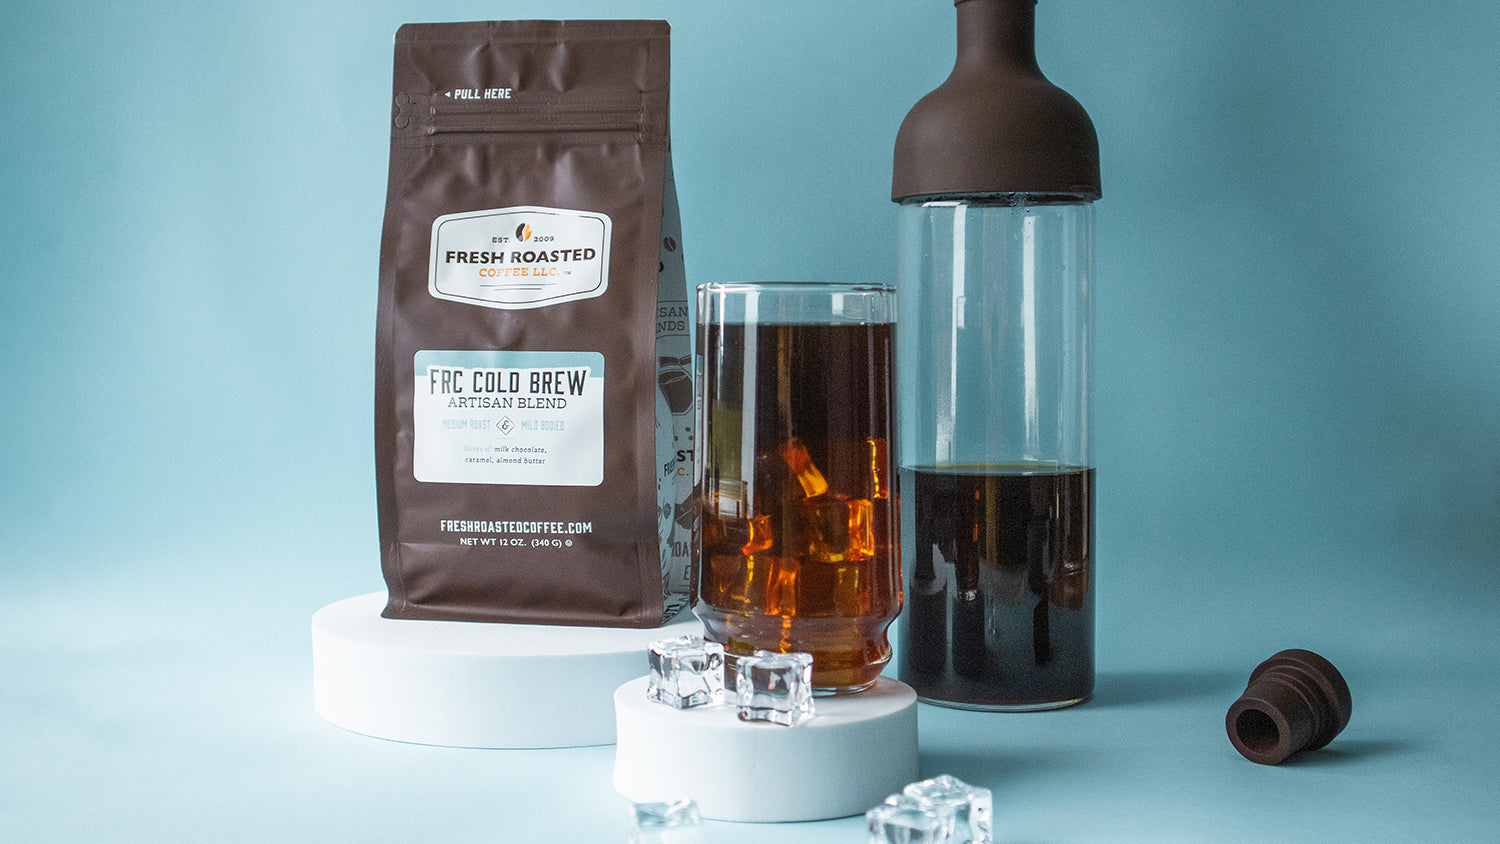 A bag of cold brew coffee, Hario Cold Brew Bottle, and a glass of cold brew.